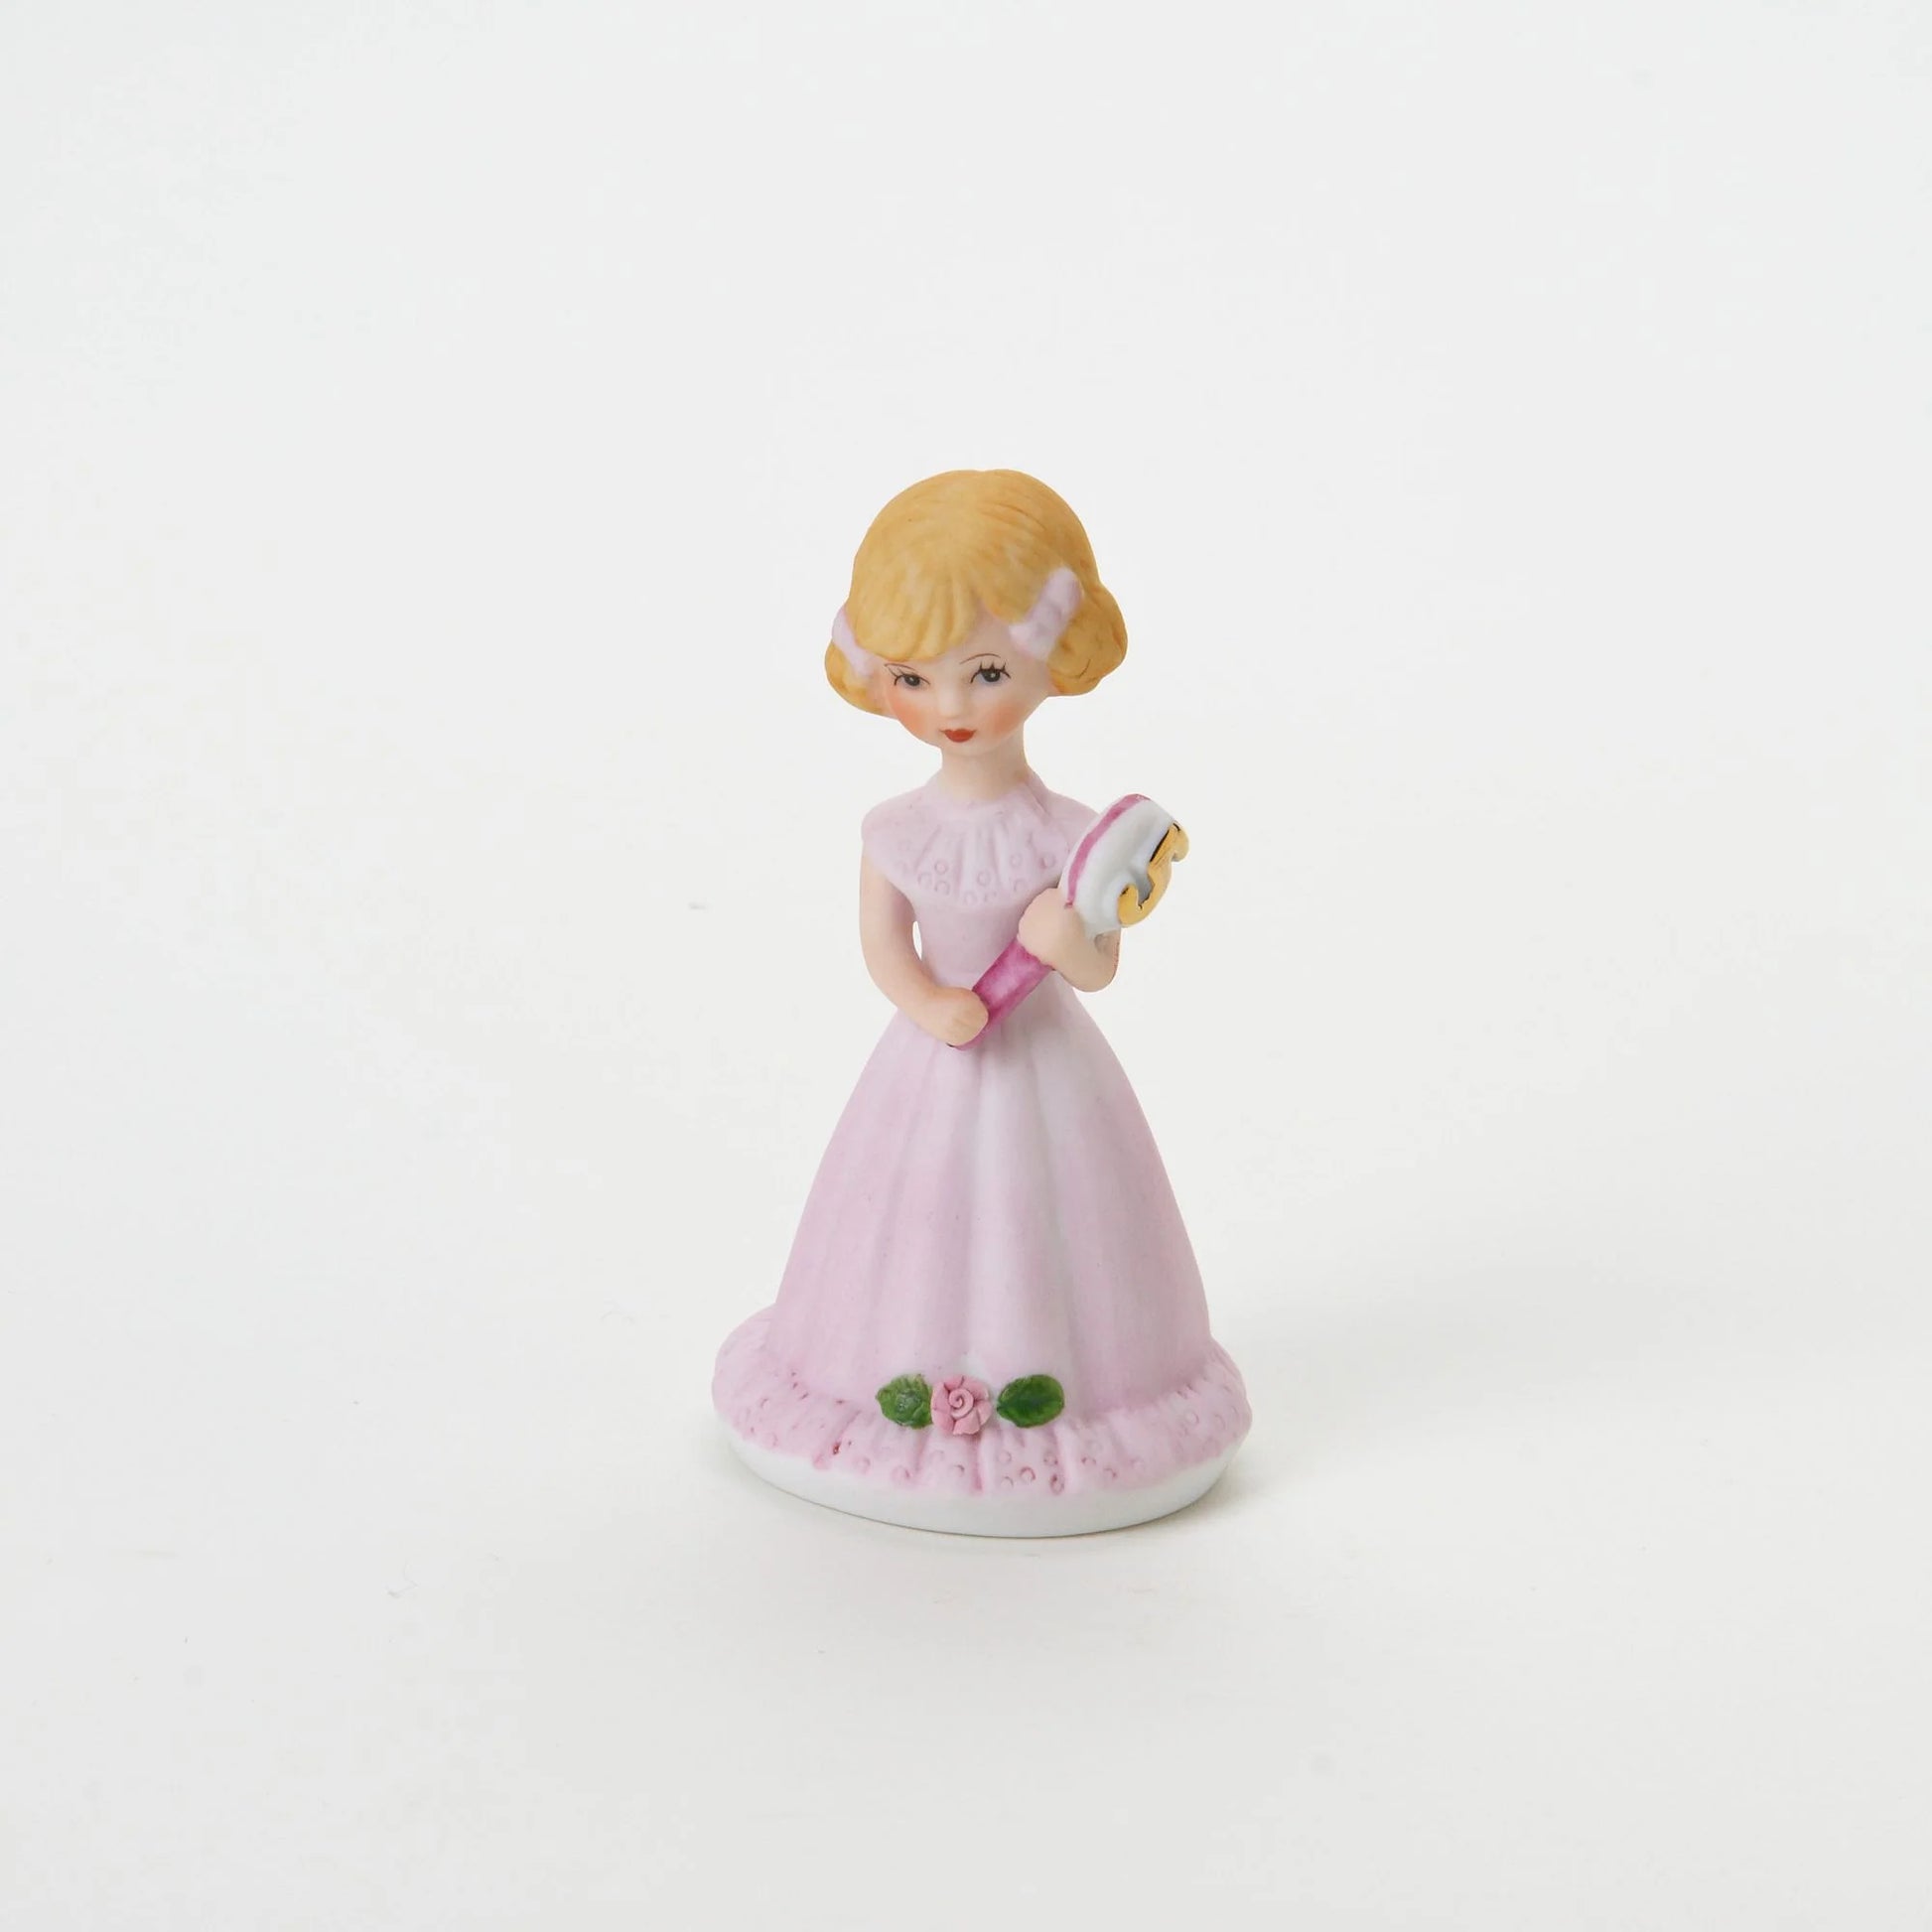 age 5 figurine front